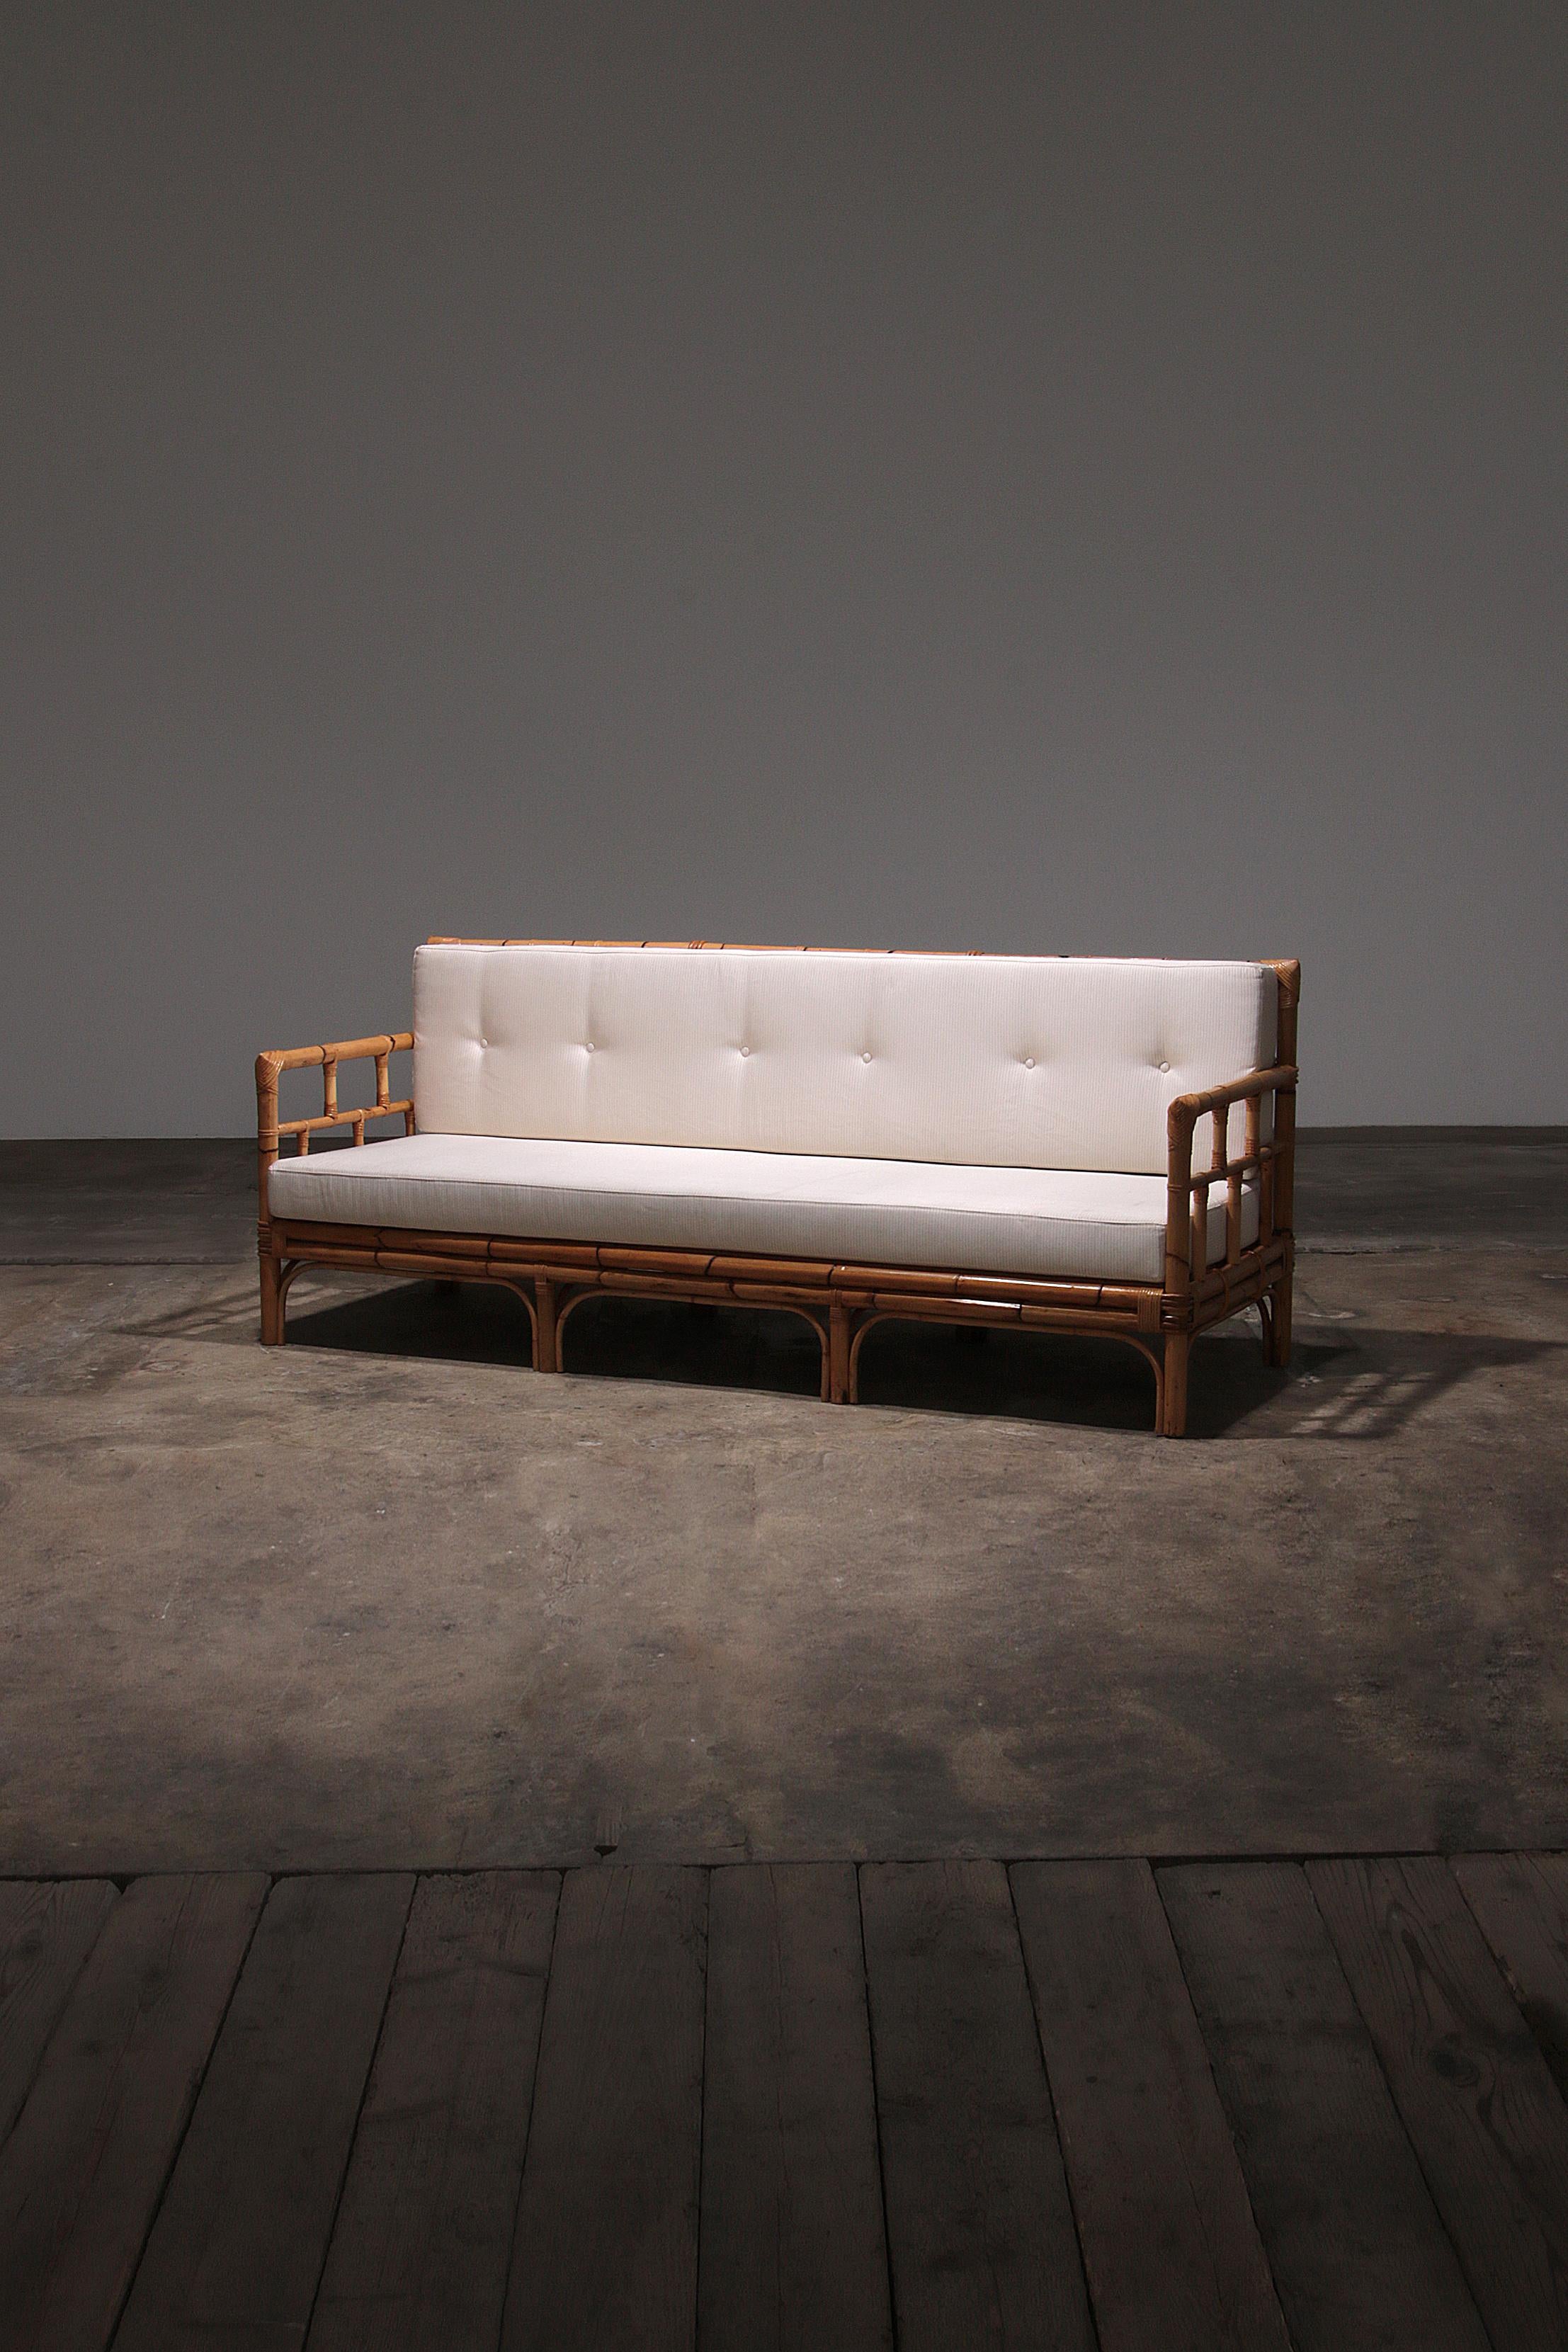 Vintage Italian Bamboo Sofa with Cushions from the 1970s


Discover the charm of a bygone era with this beautiful Italian bamboo sofa from the 1970s. This stylish sofa is not only an eye-catcher in your interior, but also offers exceptional comfort